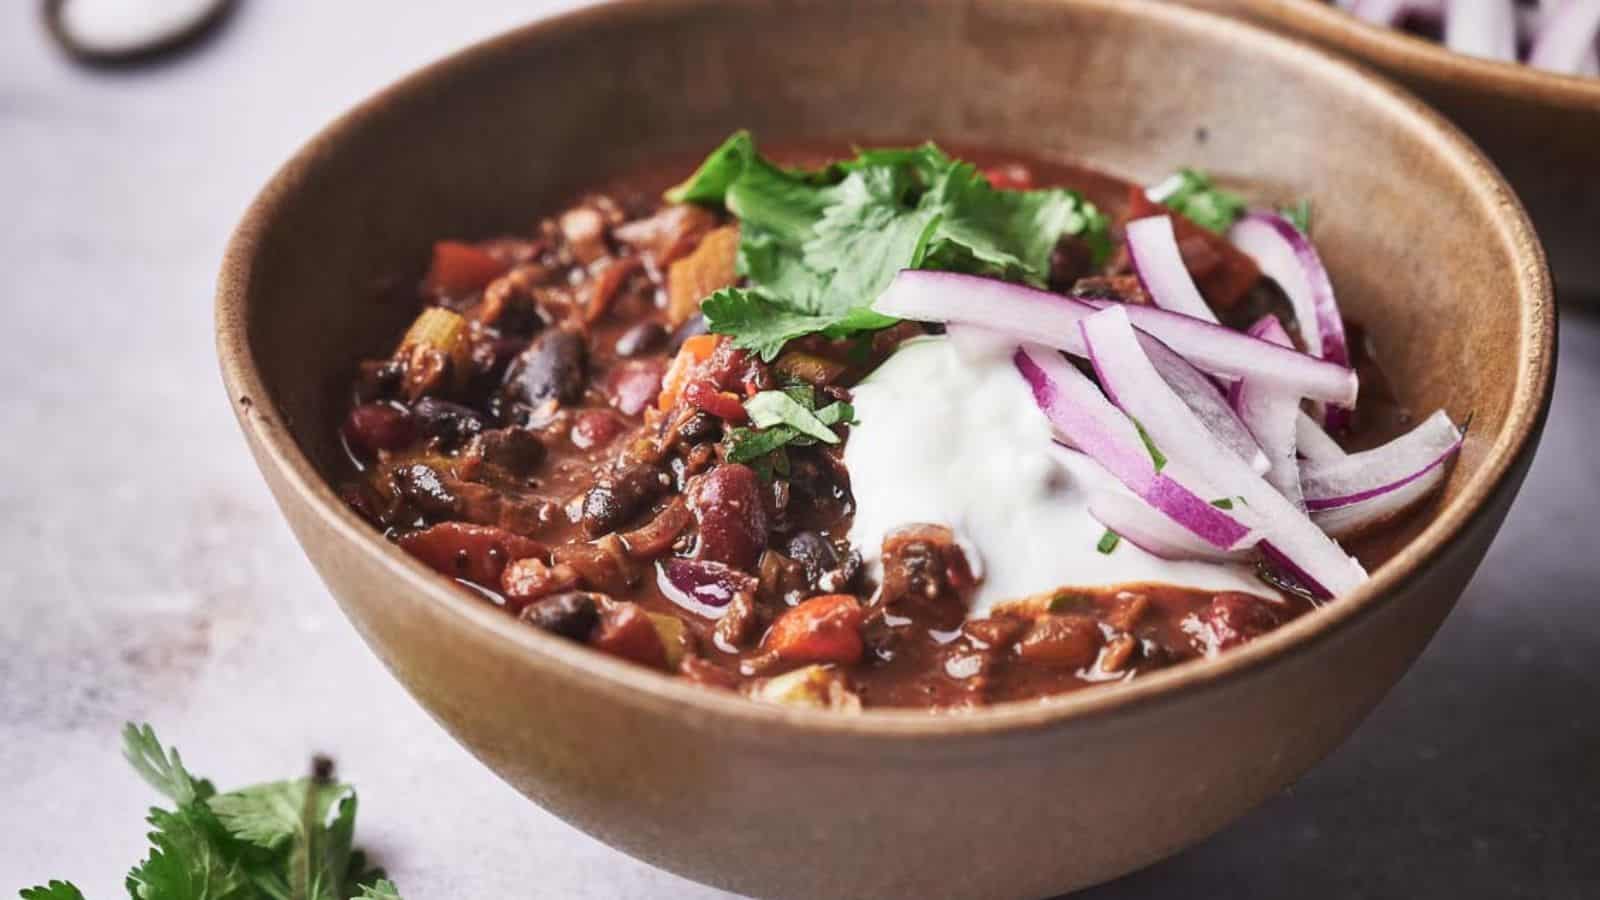 Two bowls of chili with onions and sour cream.